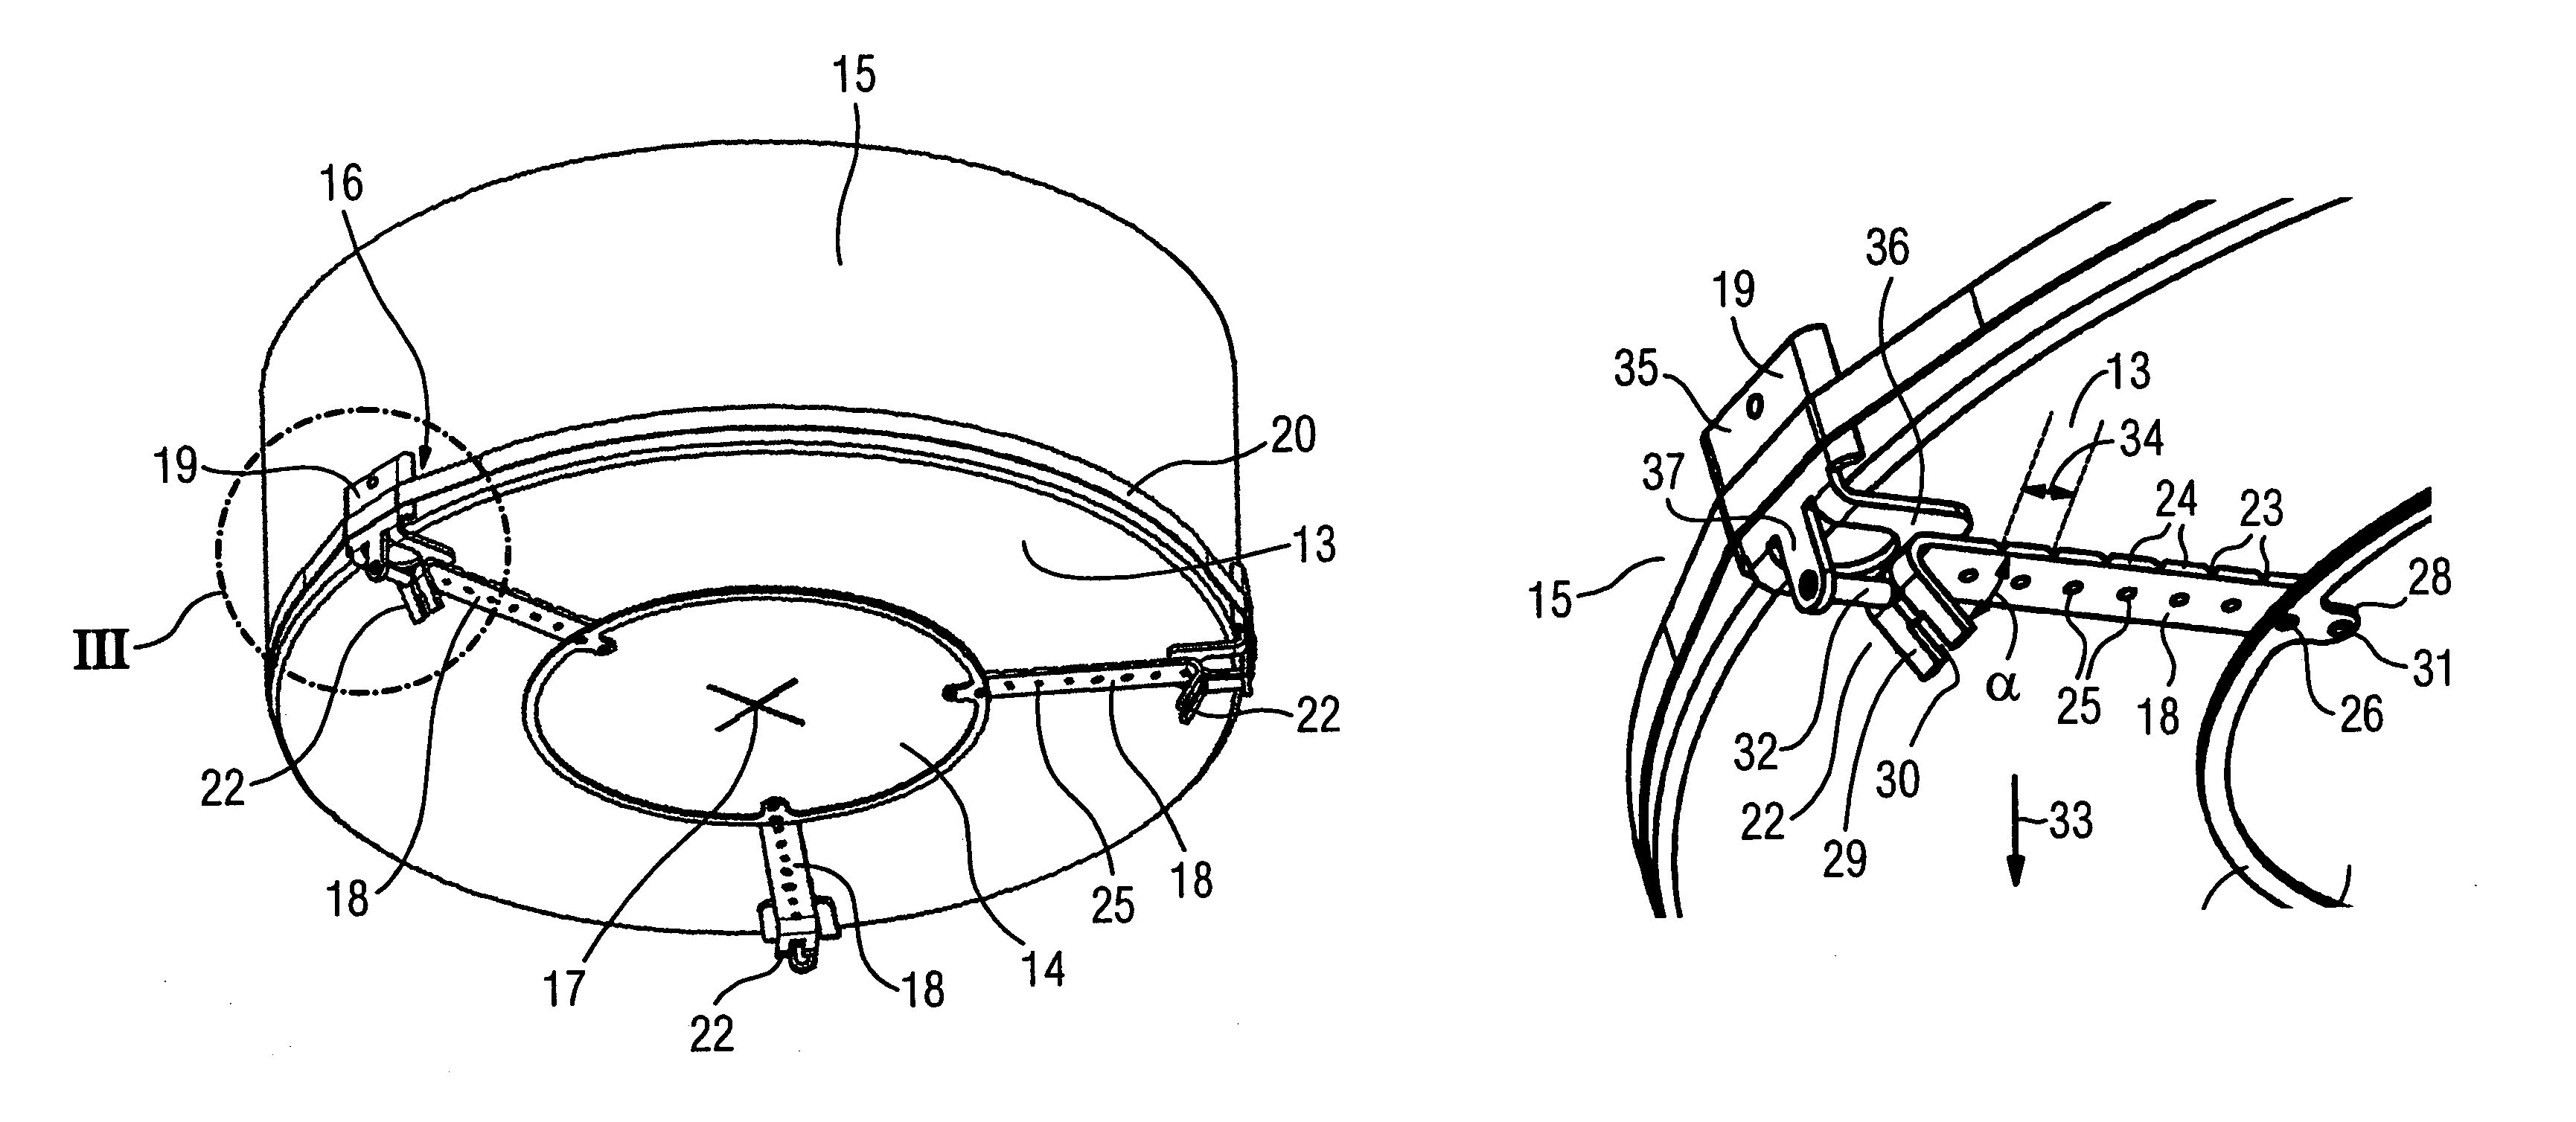 Device fittable to the therapy head of an x-ray guided lithotripsy system to allow adjustment of the focus thereof